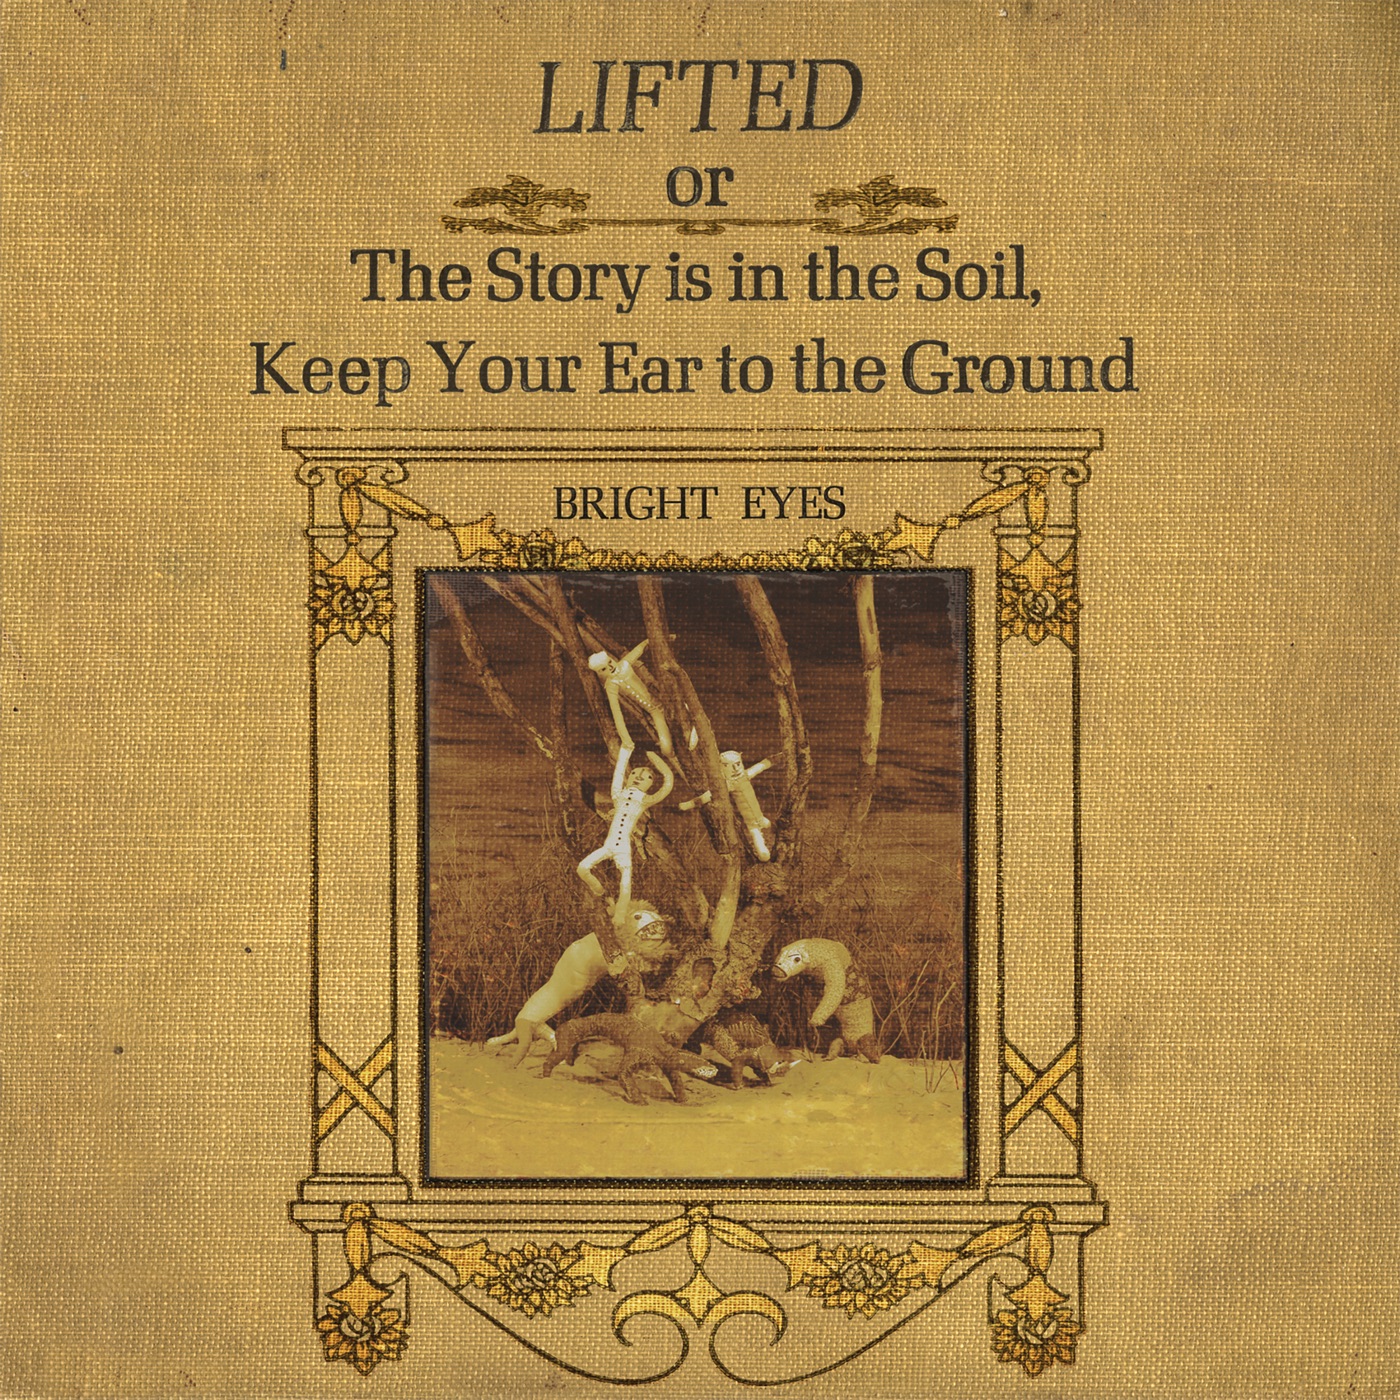 LIFTED or The Story Is in the Soil, Keep Your Ear to the Ground by Bright Eyes